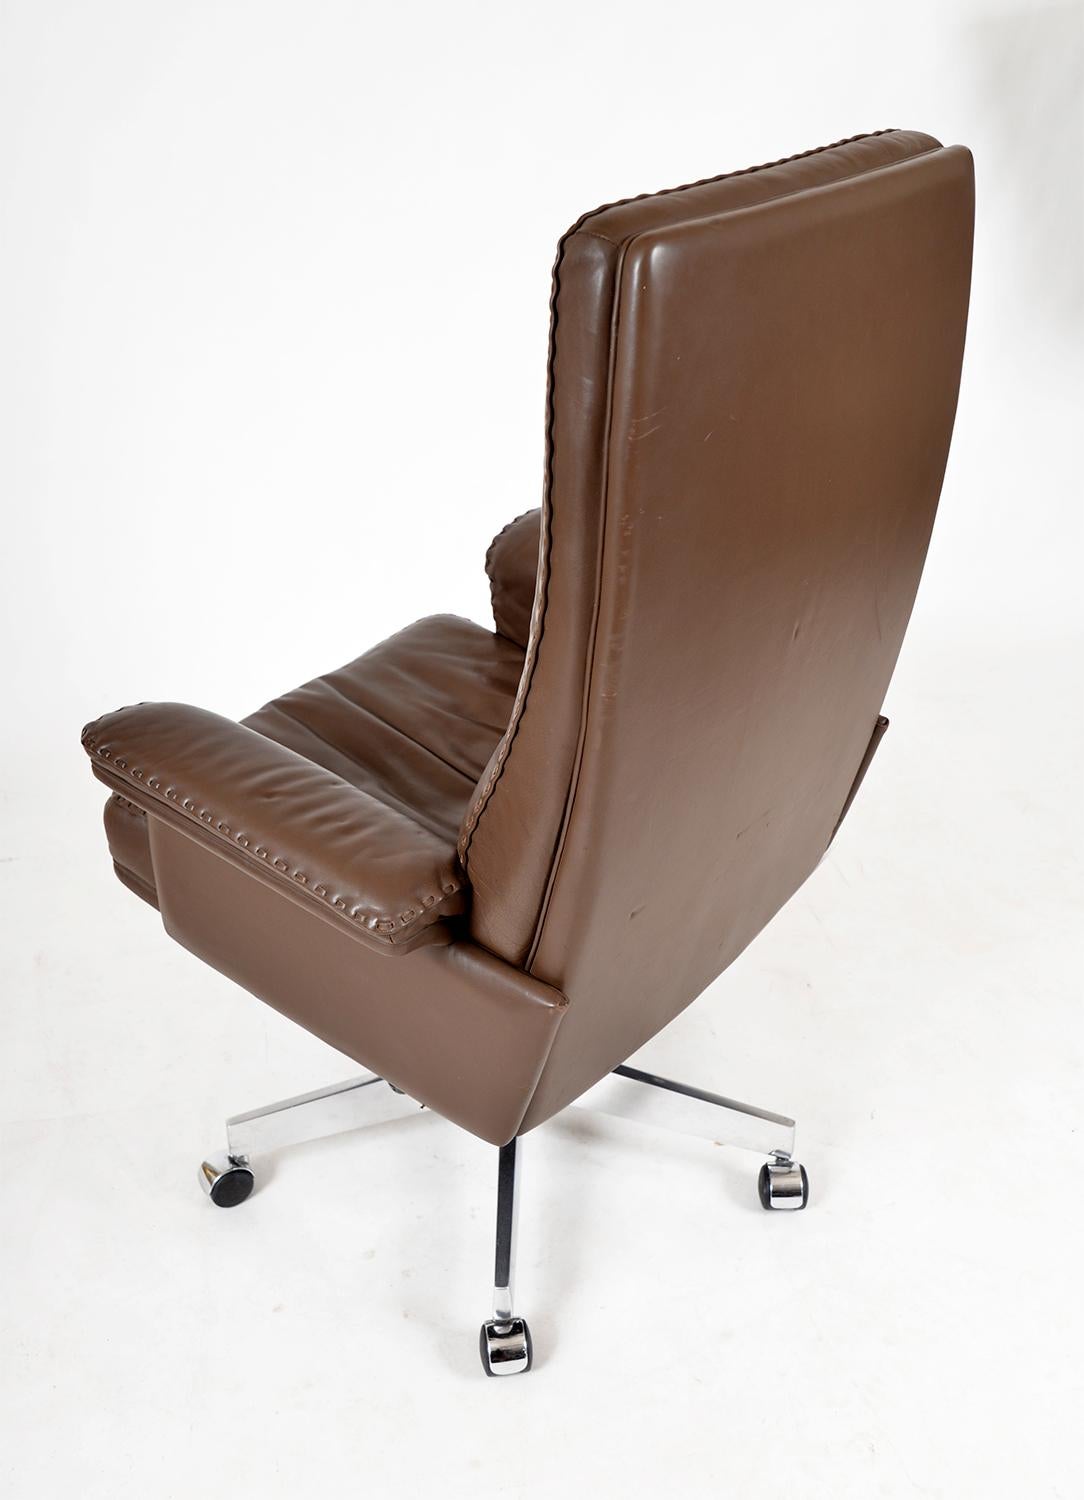 1970s Swiss De Sede Ds 35 Executive Swivel Leather Office Chair Armchair Castors In Good Condition In Sherborne, Dorset